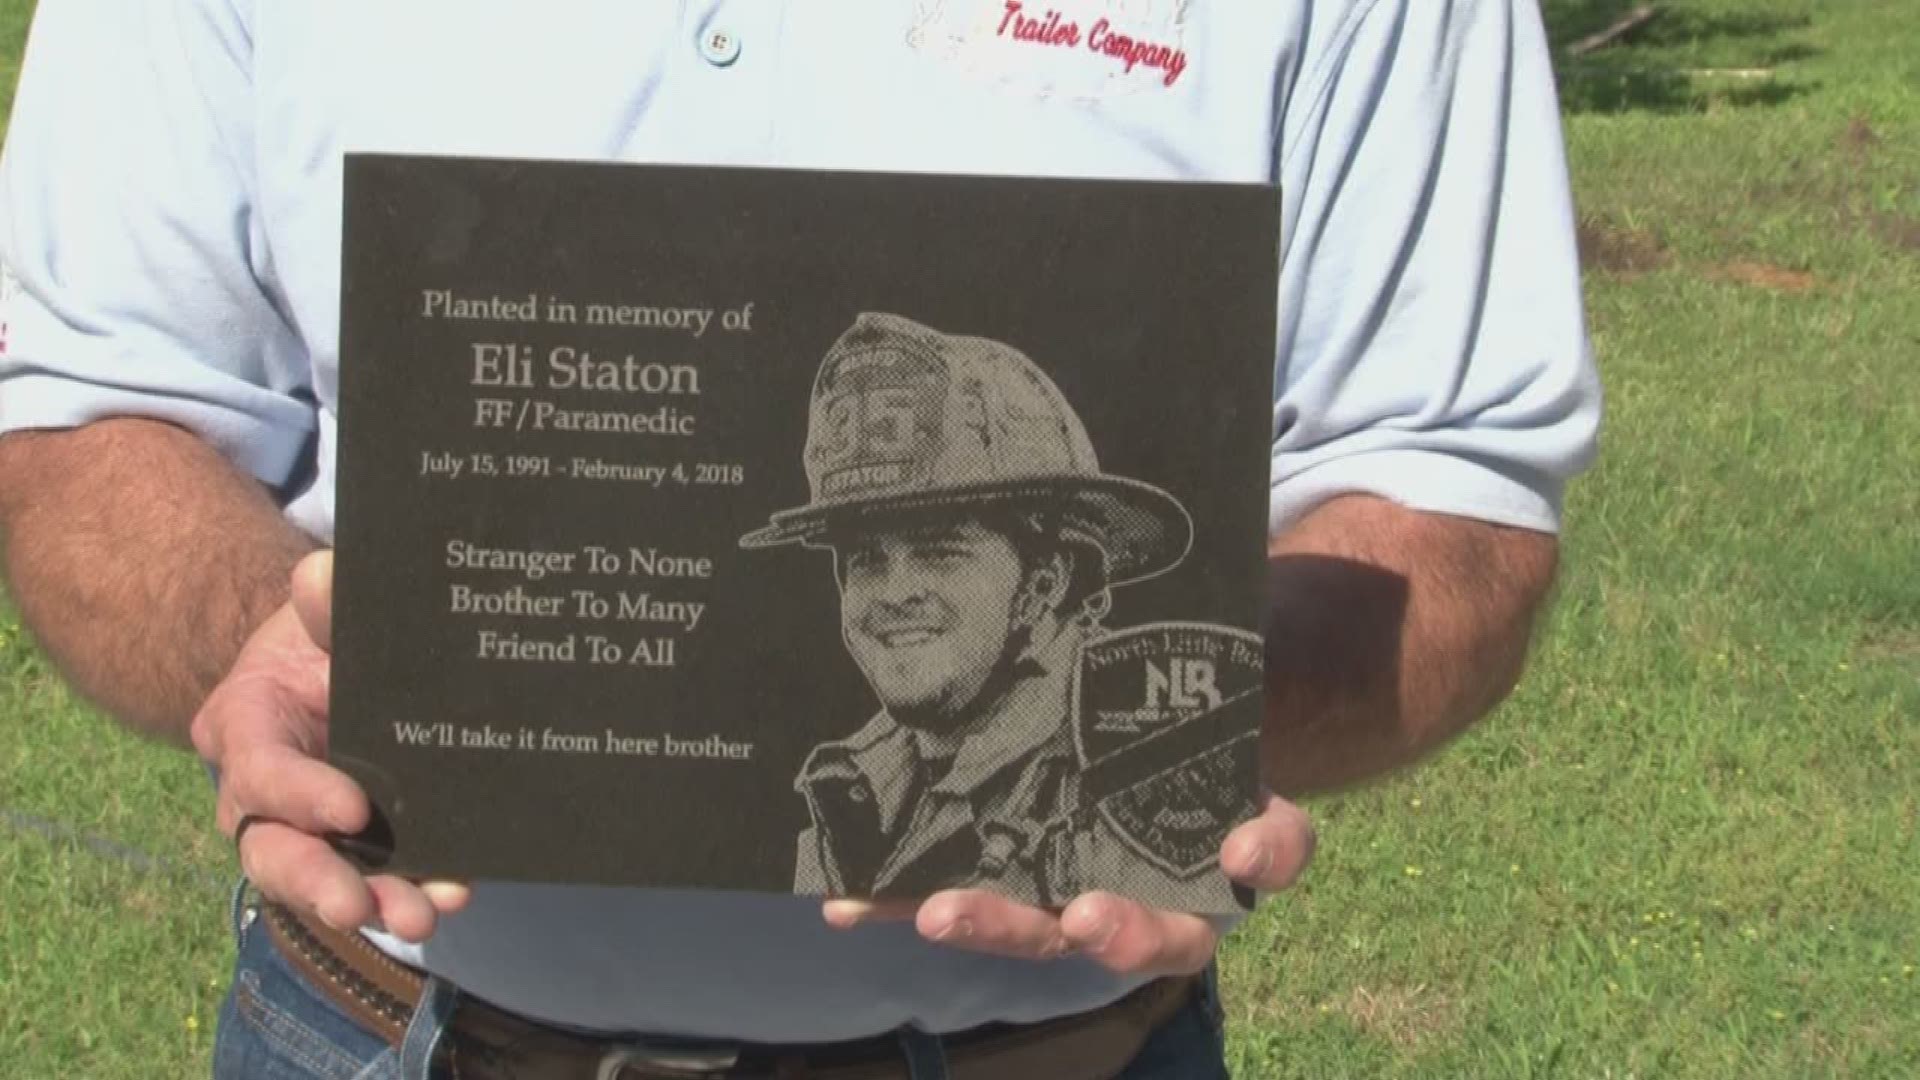 To honor one of their own, the North Little Rock Fire Department planted a tree.